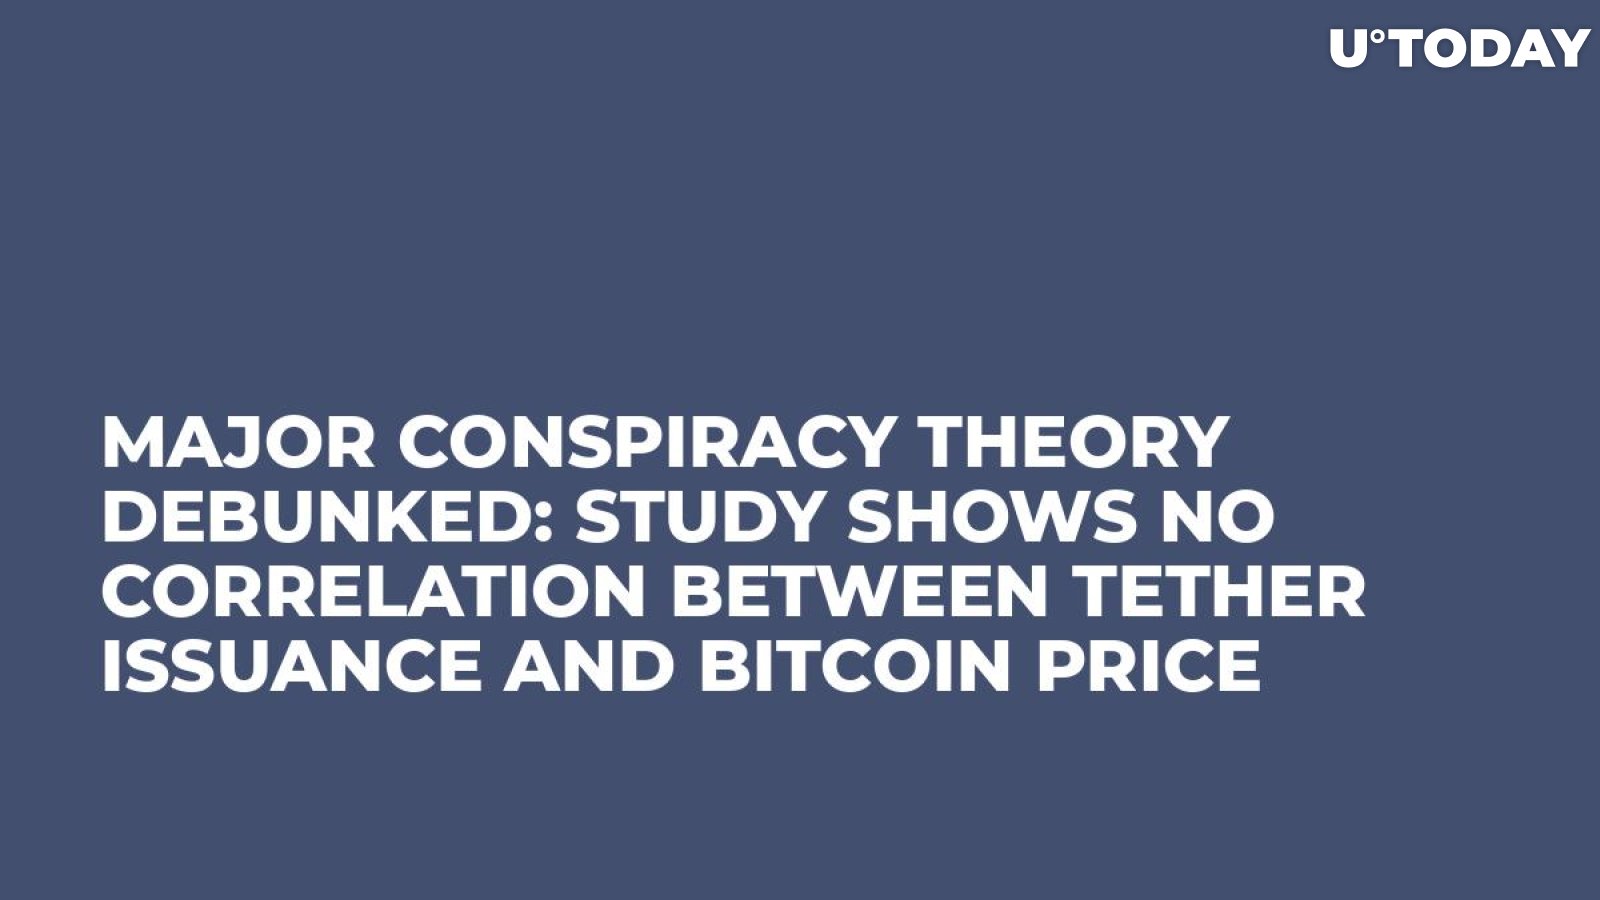 Major Conspiracy Theory Debunked: Study Shows No Correlation Between Tether Issuance and Bitcoin Price